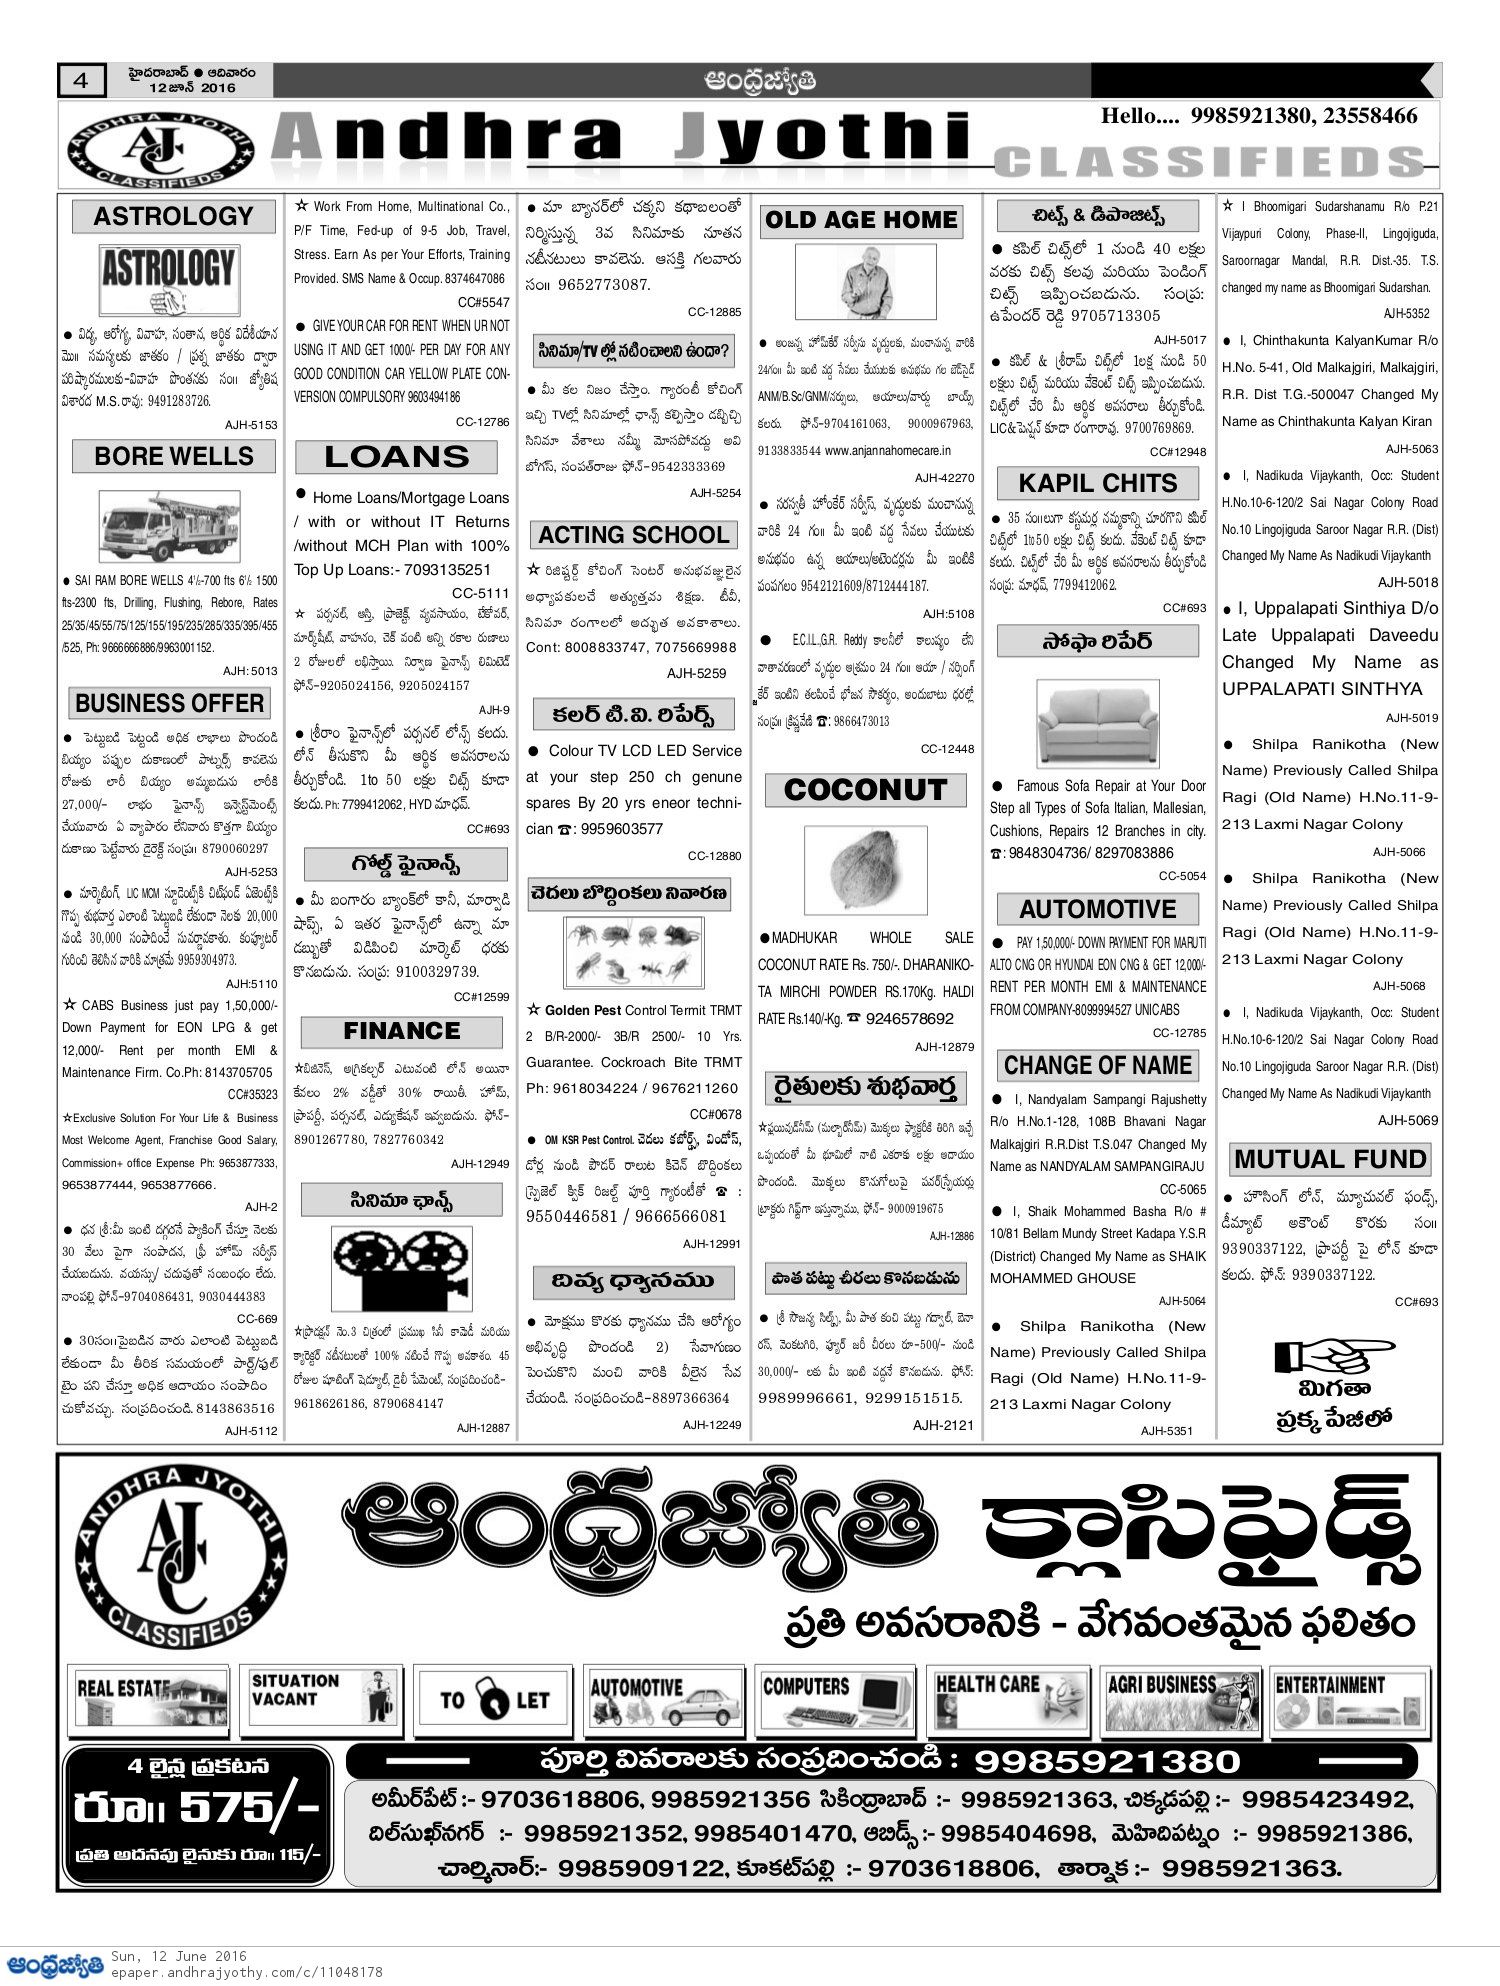 Andhra Jyothy Classified Ad Rates